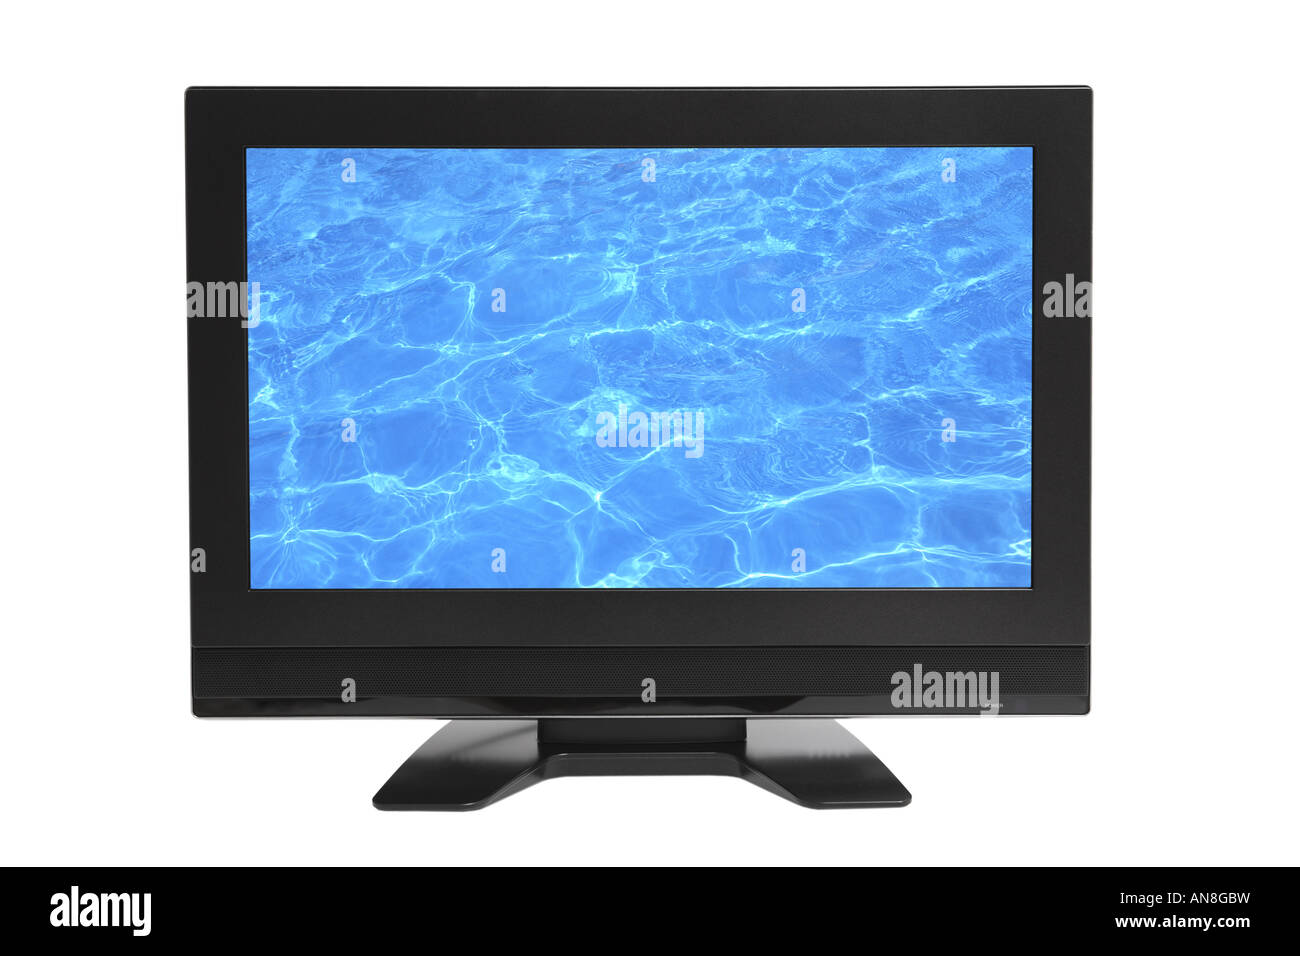 HD television with water image on screen cut out on white background Stock Photo